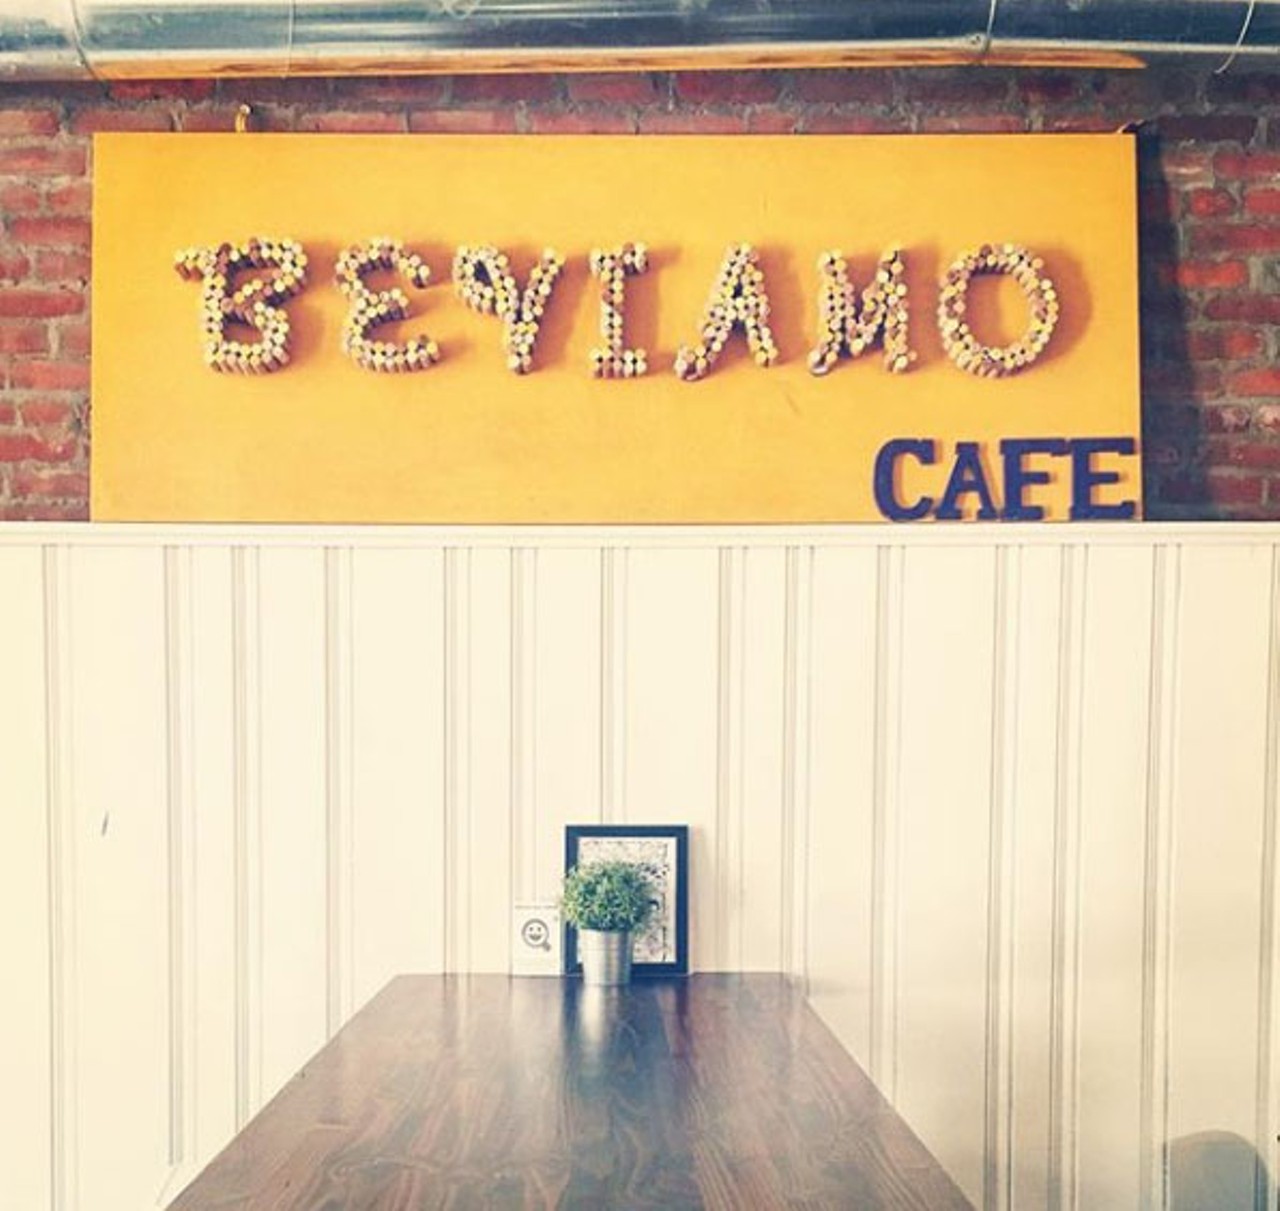 Beviamo Cafe
2275 Professor Ave., 216-202-2300
This Tremont spot has a selection of teas, including matcha and Maya chai, but they are also known for their vegan food and delicious smoothies. 
Photo via doseofcre8tivity/Instagram